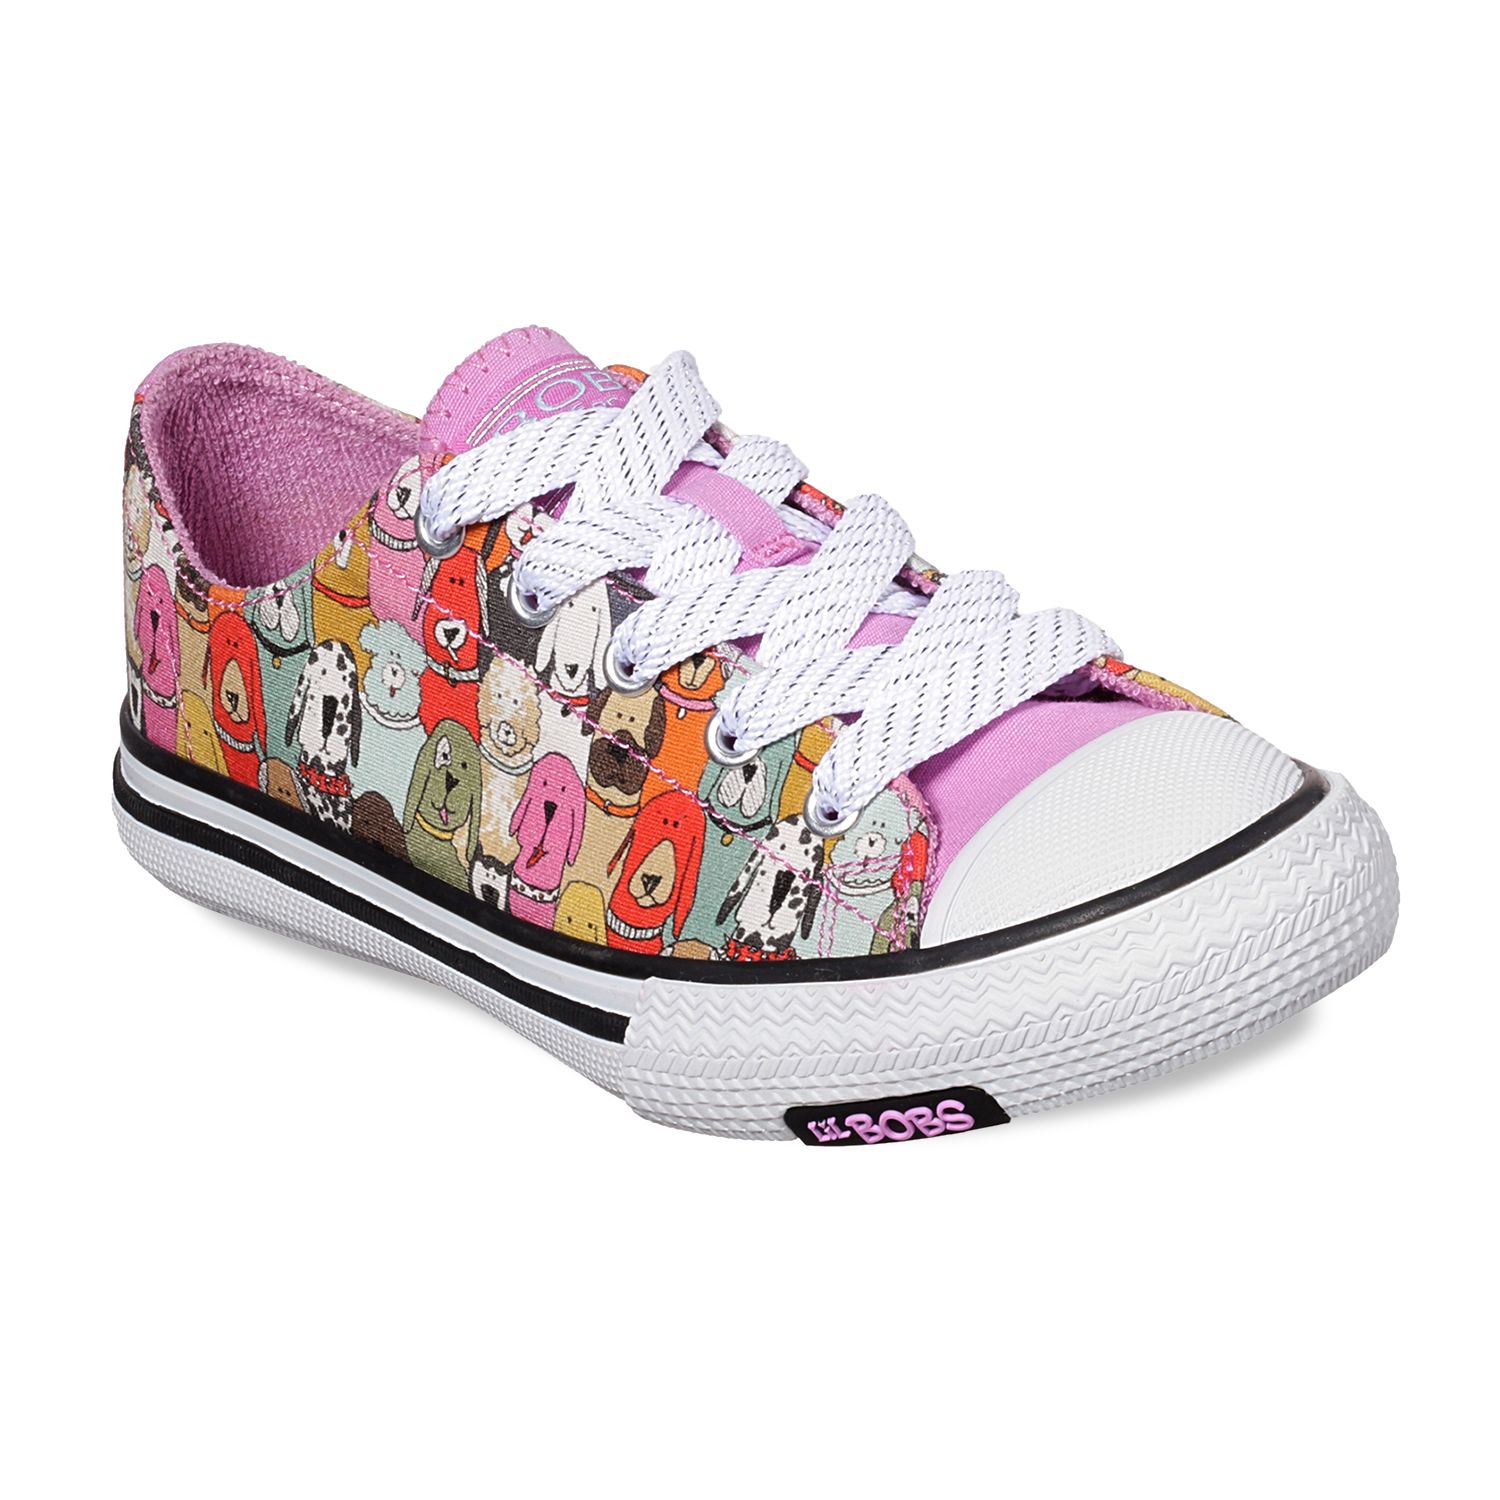 bobs puppy shoes